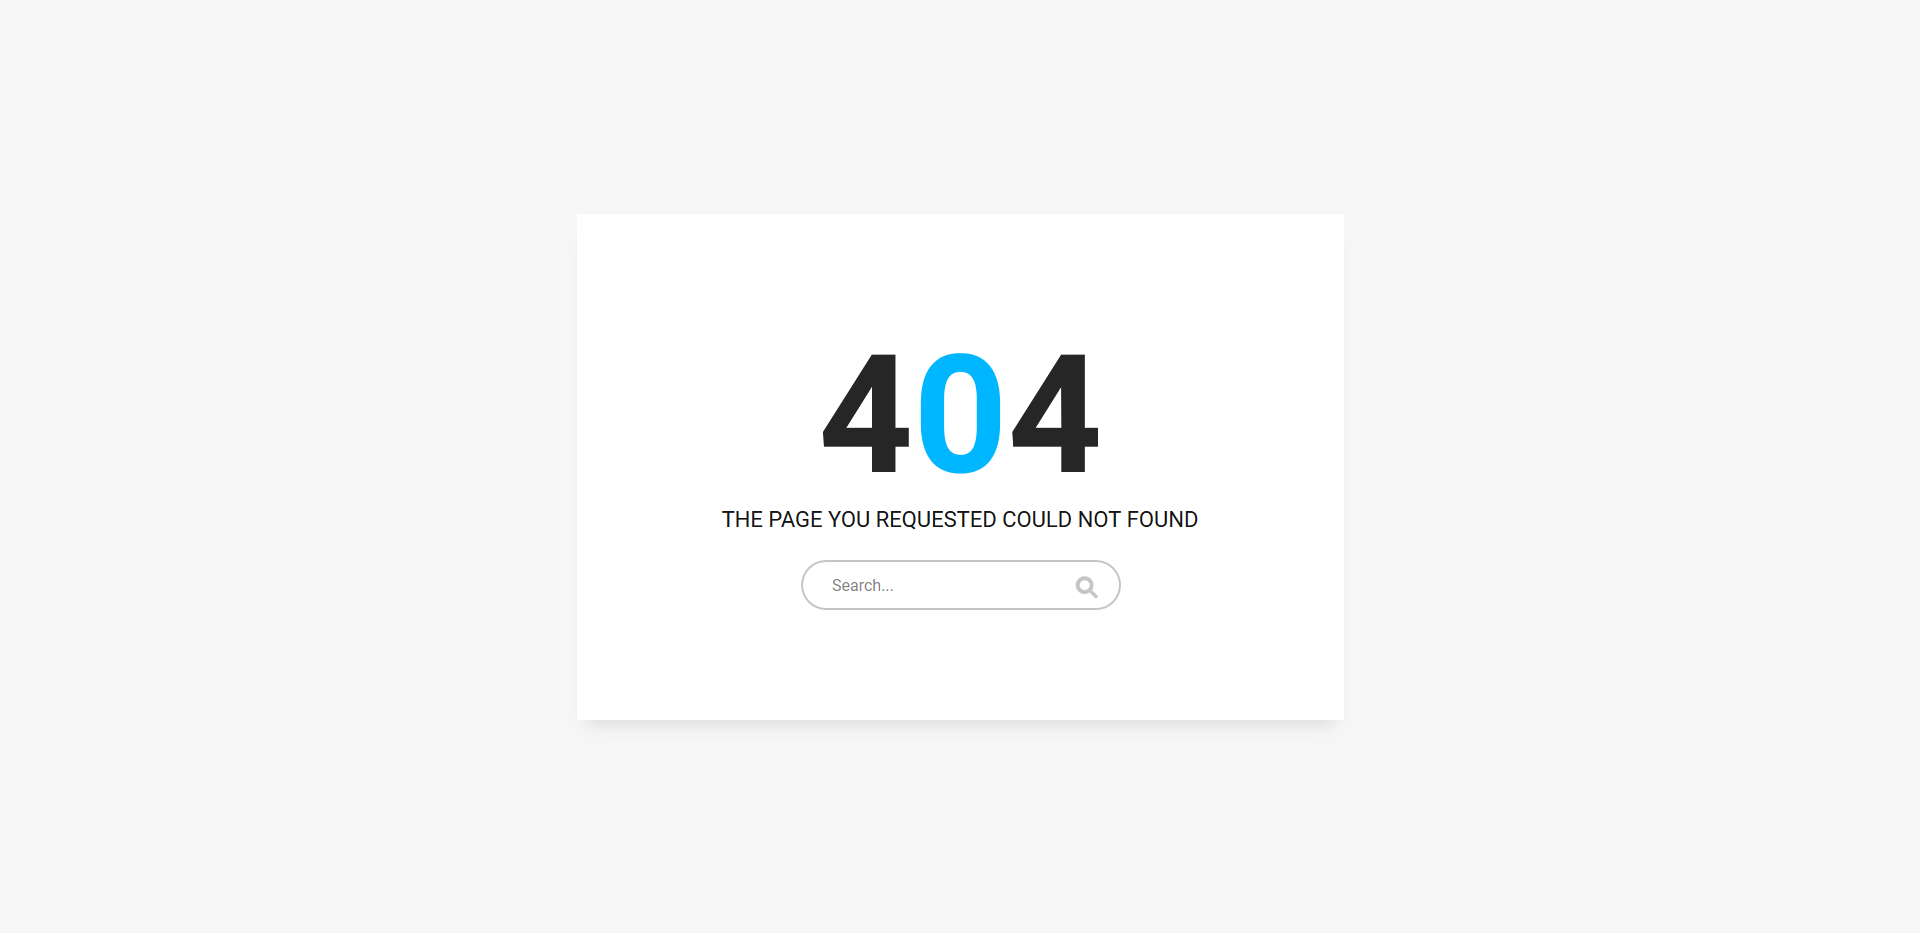 48 Best Easy To Customize Free Error Page Templates 2020 Colorlib